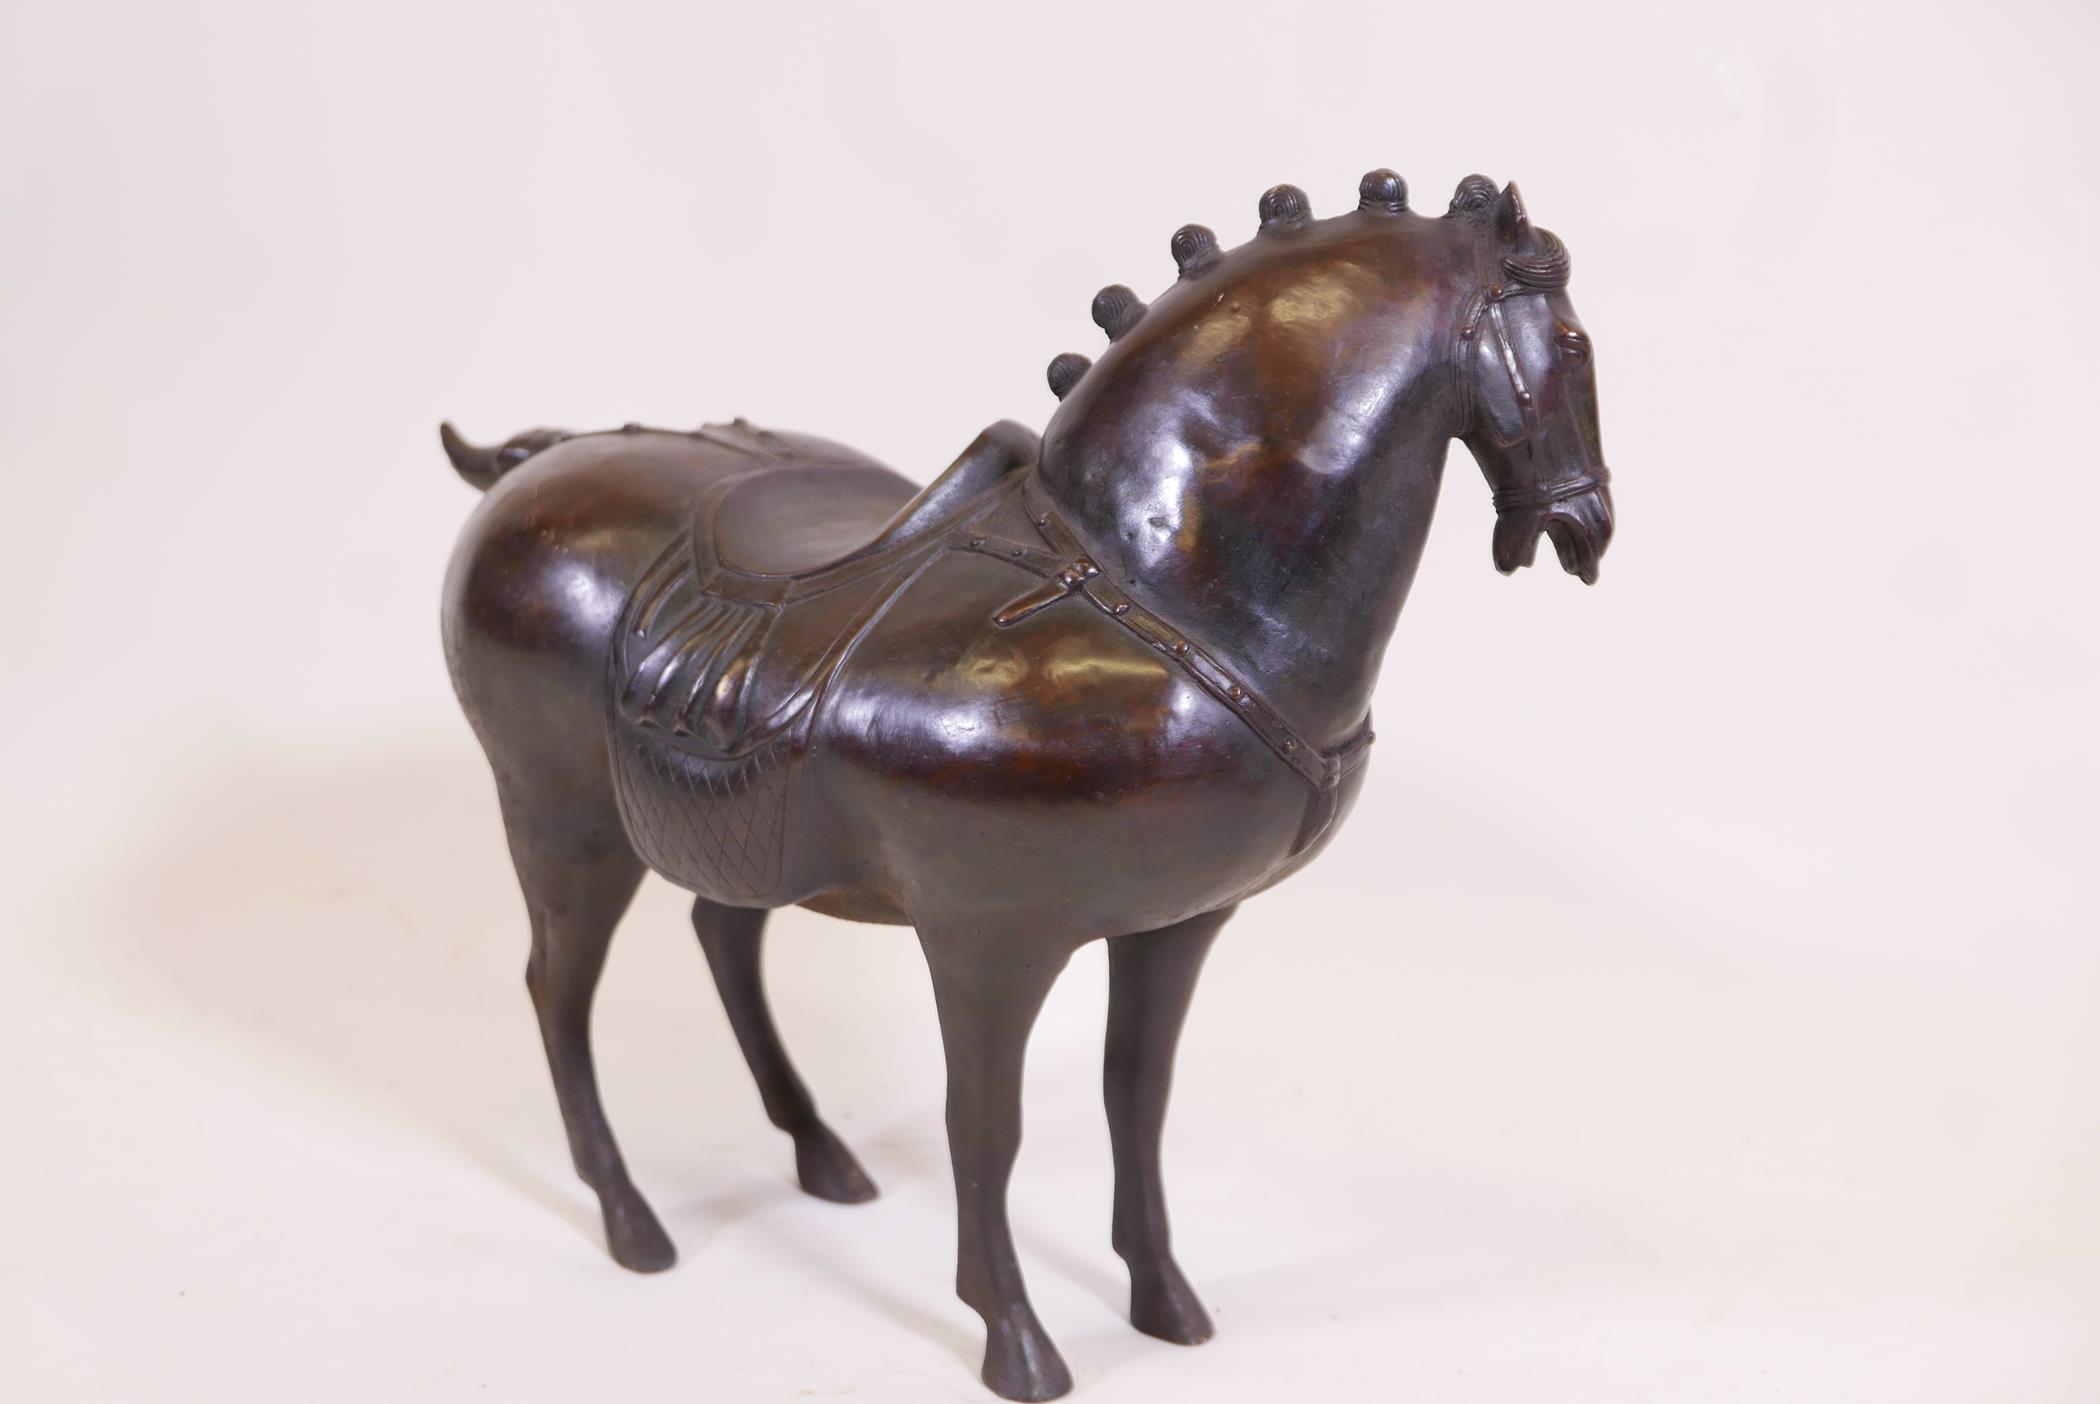 A Chinese bronze figure of a horse with saddle and harness, 15" high - Image 2 of 2